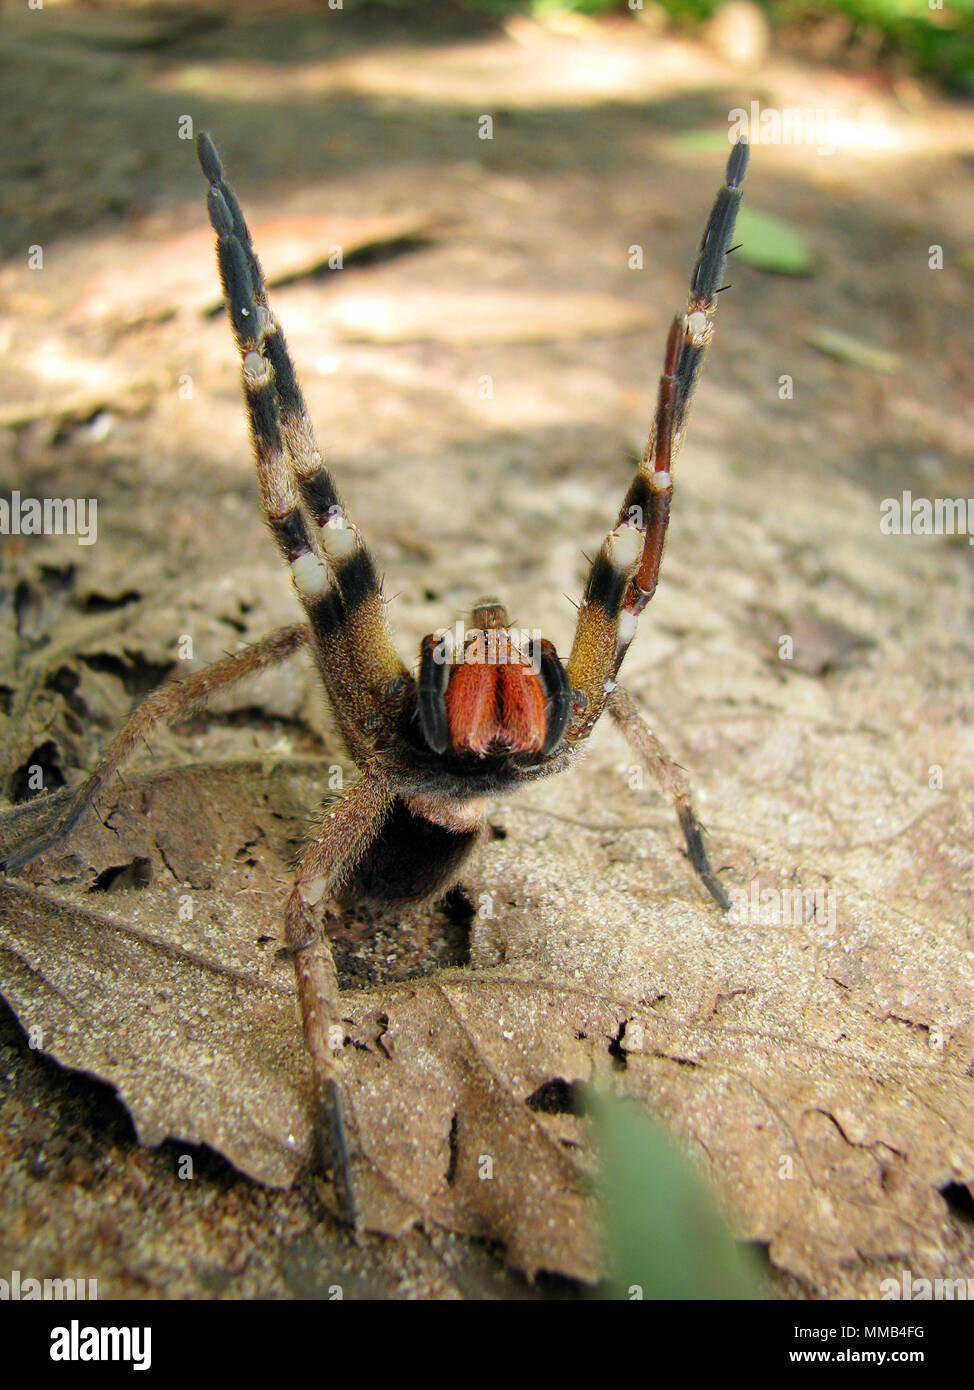 Brazilian wandering spider (Phoneutria nigriventer) armed with threat display, also known as aranha armadeira or banana spider. Stock Photo